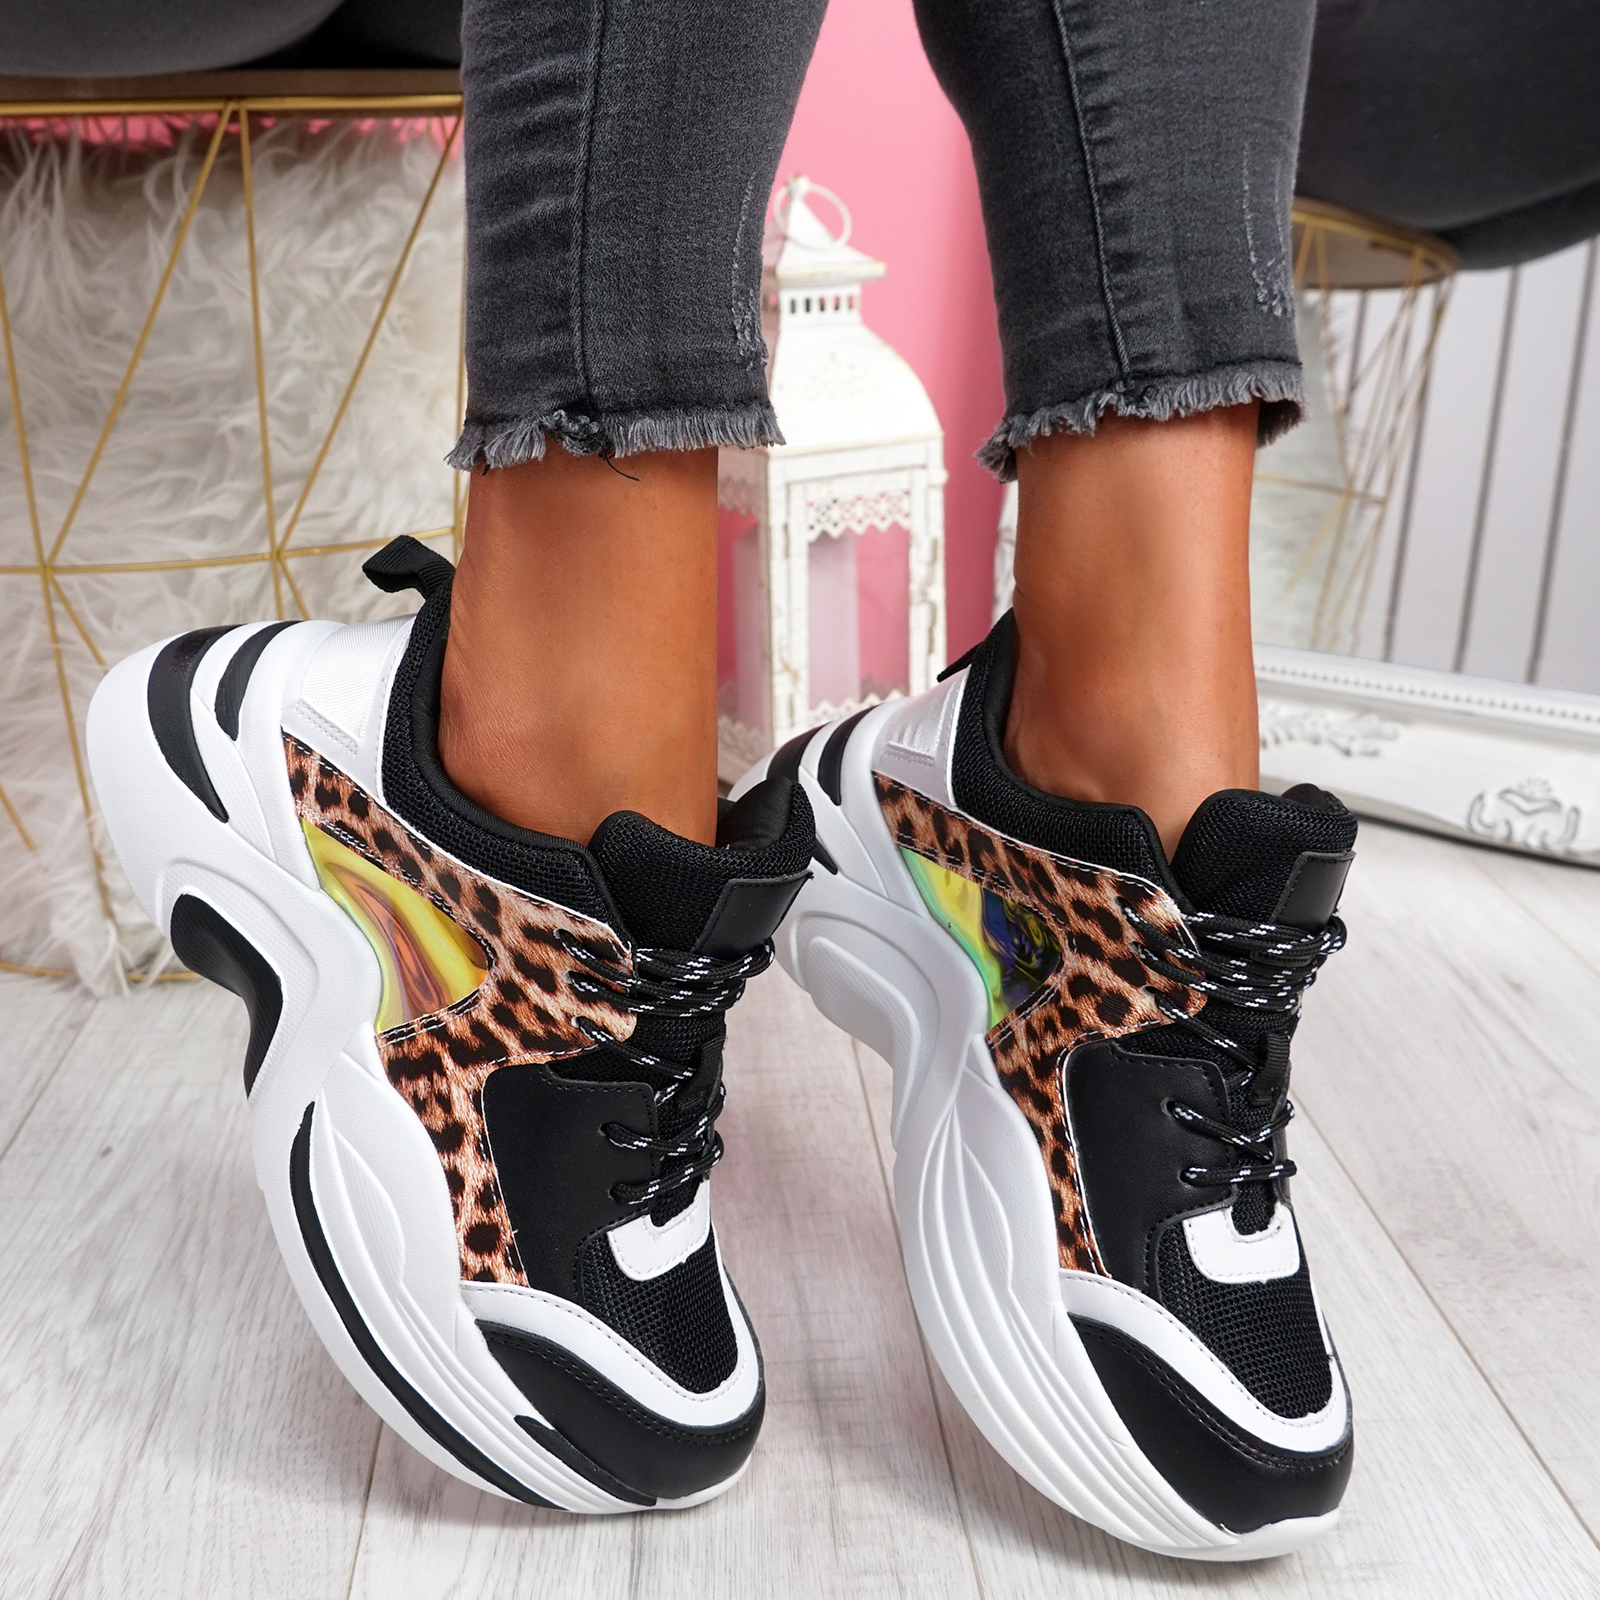 womens trainers with leopard print